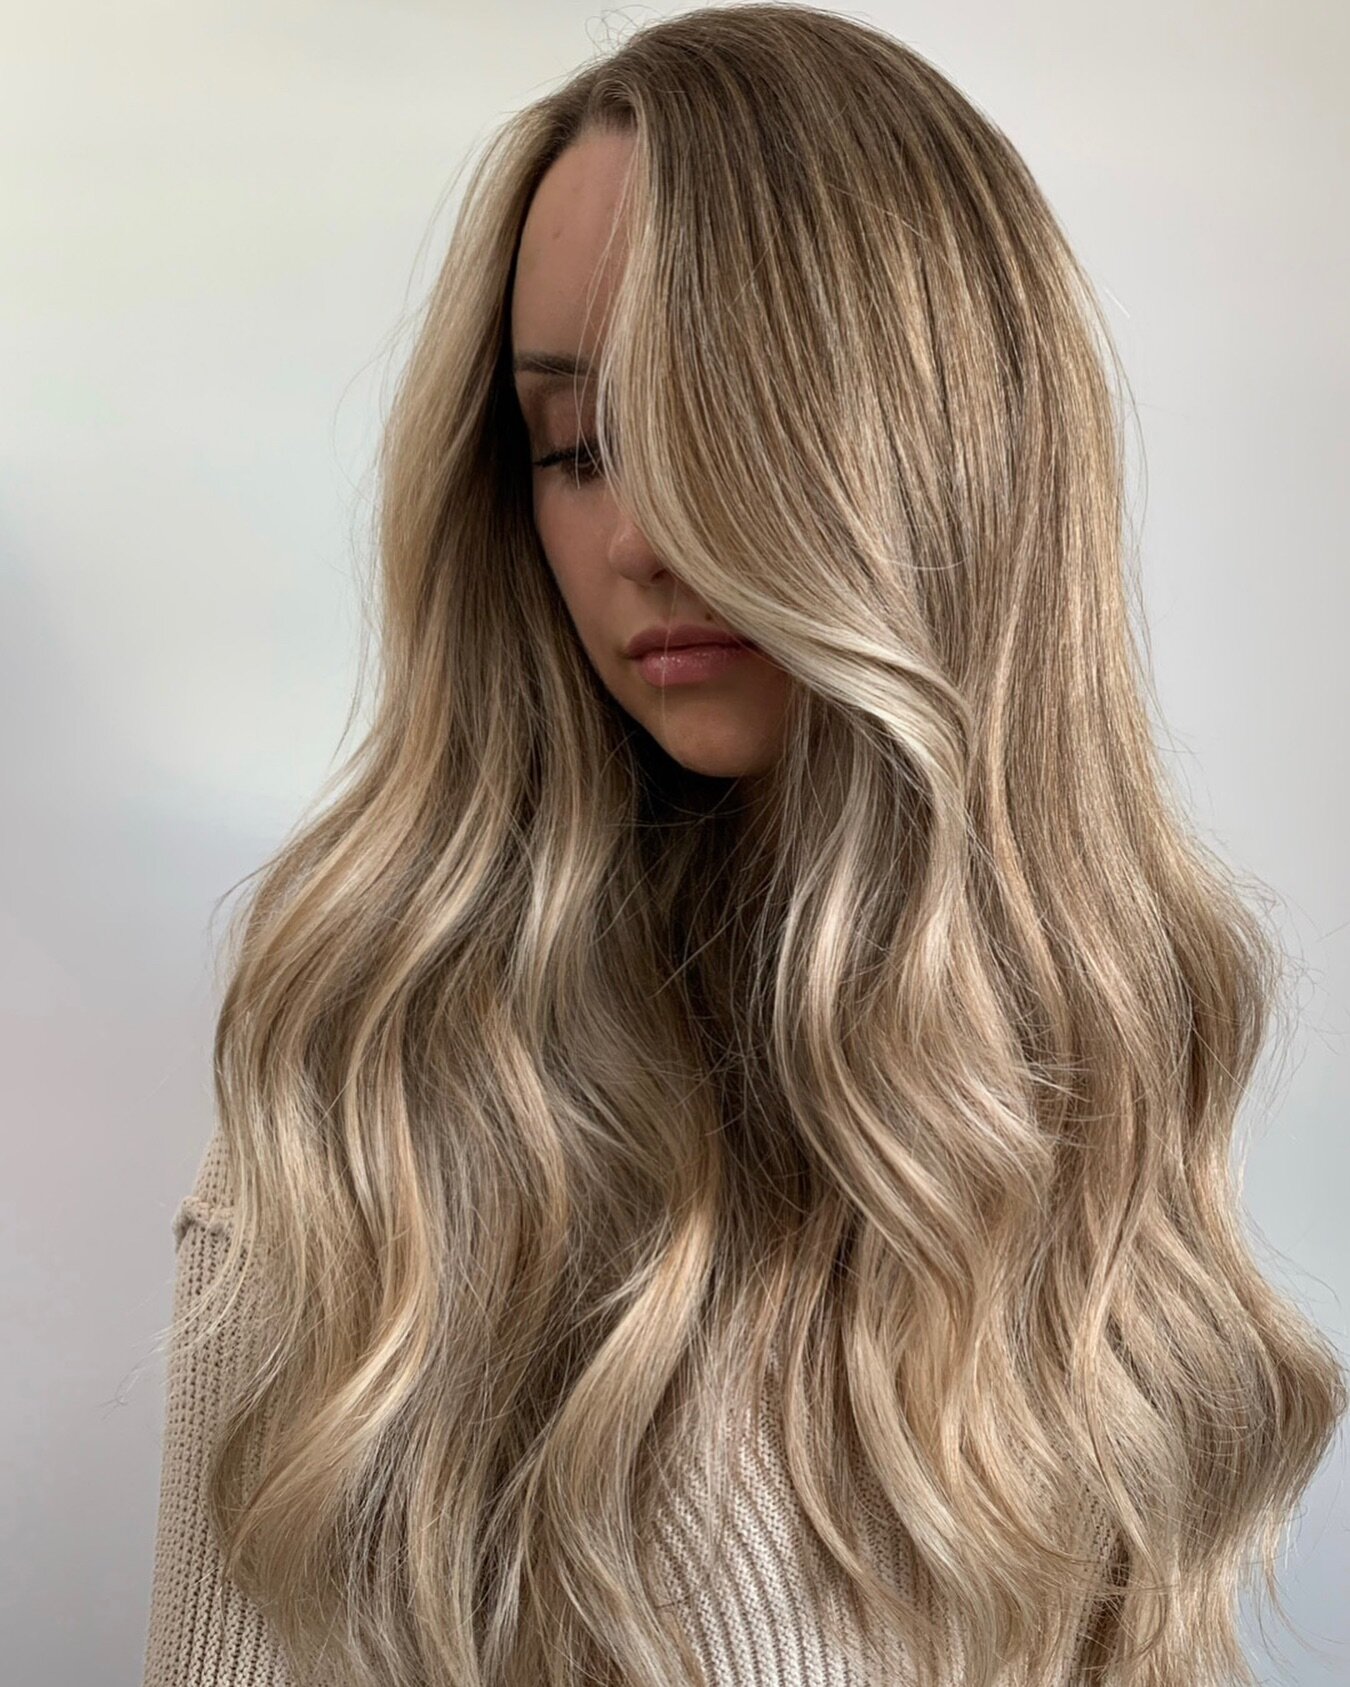 That timeless, old-money blonde that grows out like a dream // book your spring appointment via link in bio or by texting us at 587-575-3755. @thebeigelabelsalon #hairyoucanlivein #oldmoneyblonde